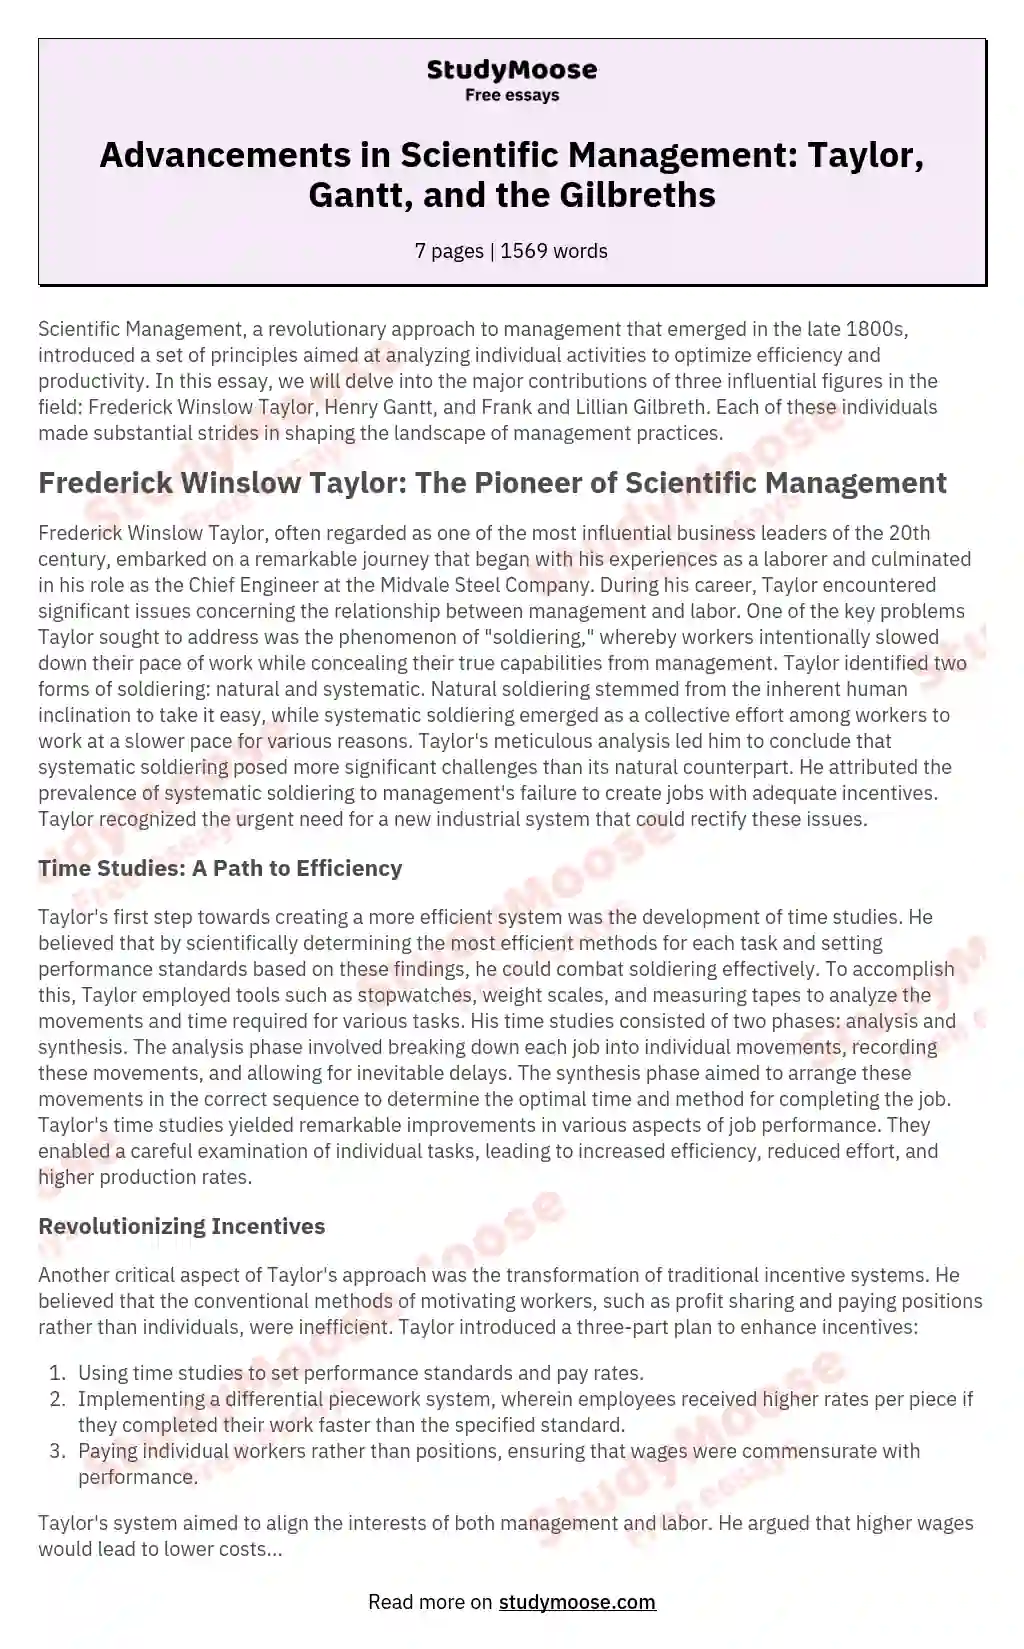 Advancements in Scientific Management: Taylor, Gantt, and the Gilbreths essay